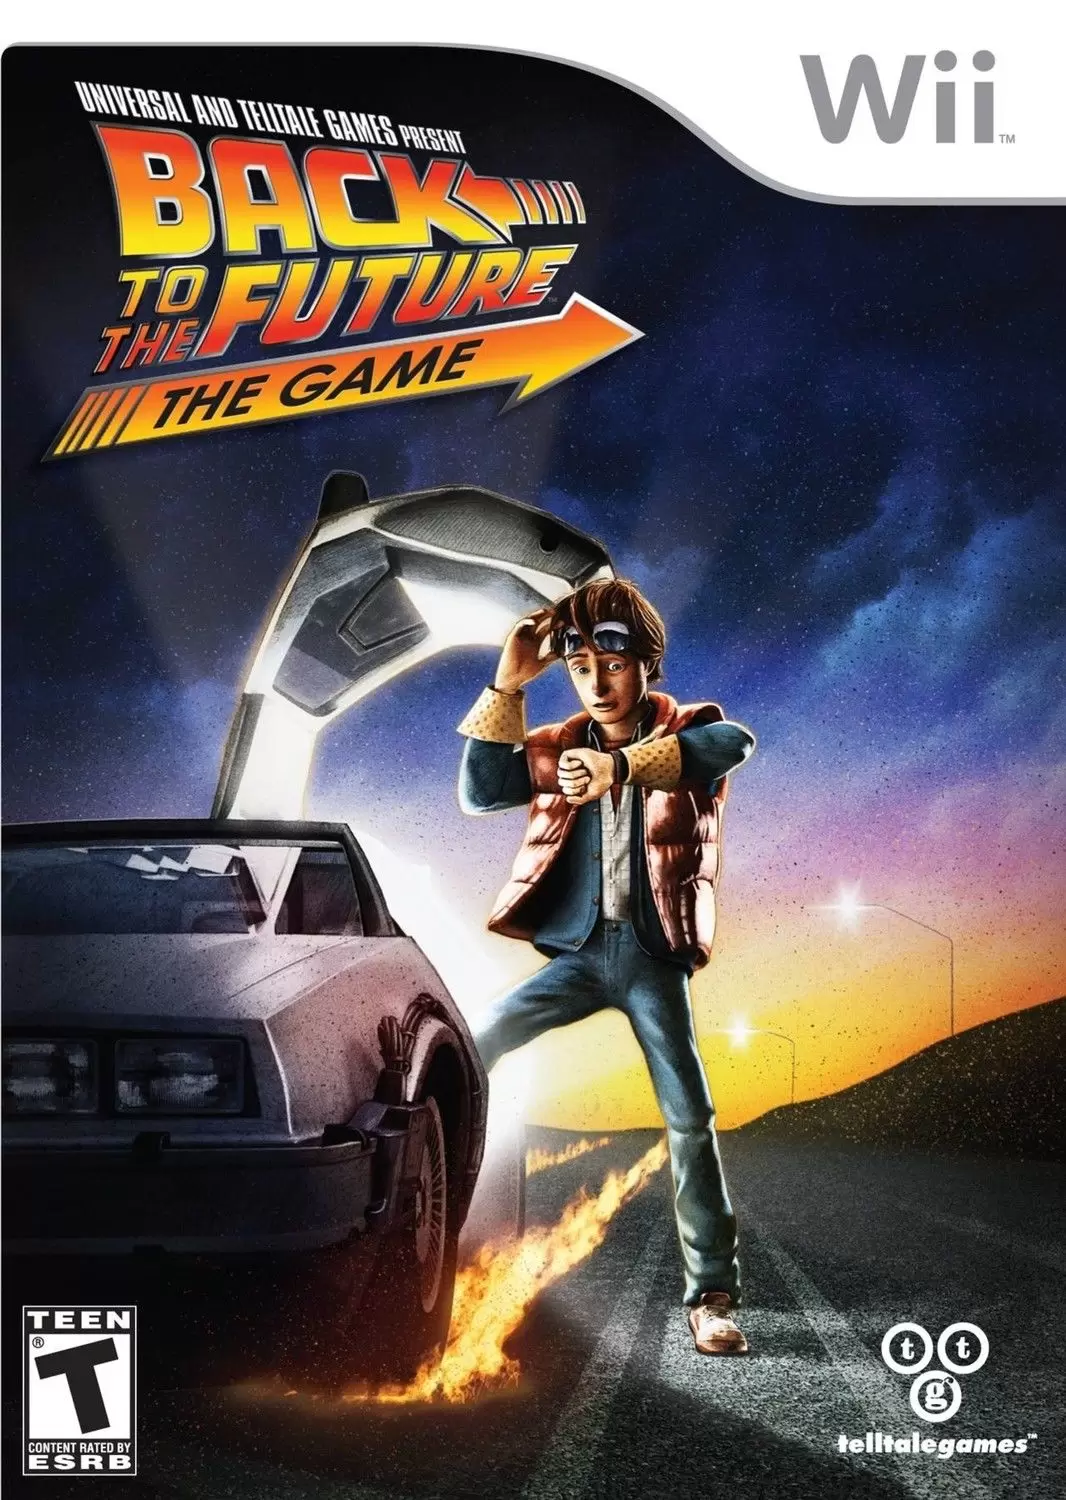 Nintendo Wii Games - Back to the Future: The Game